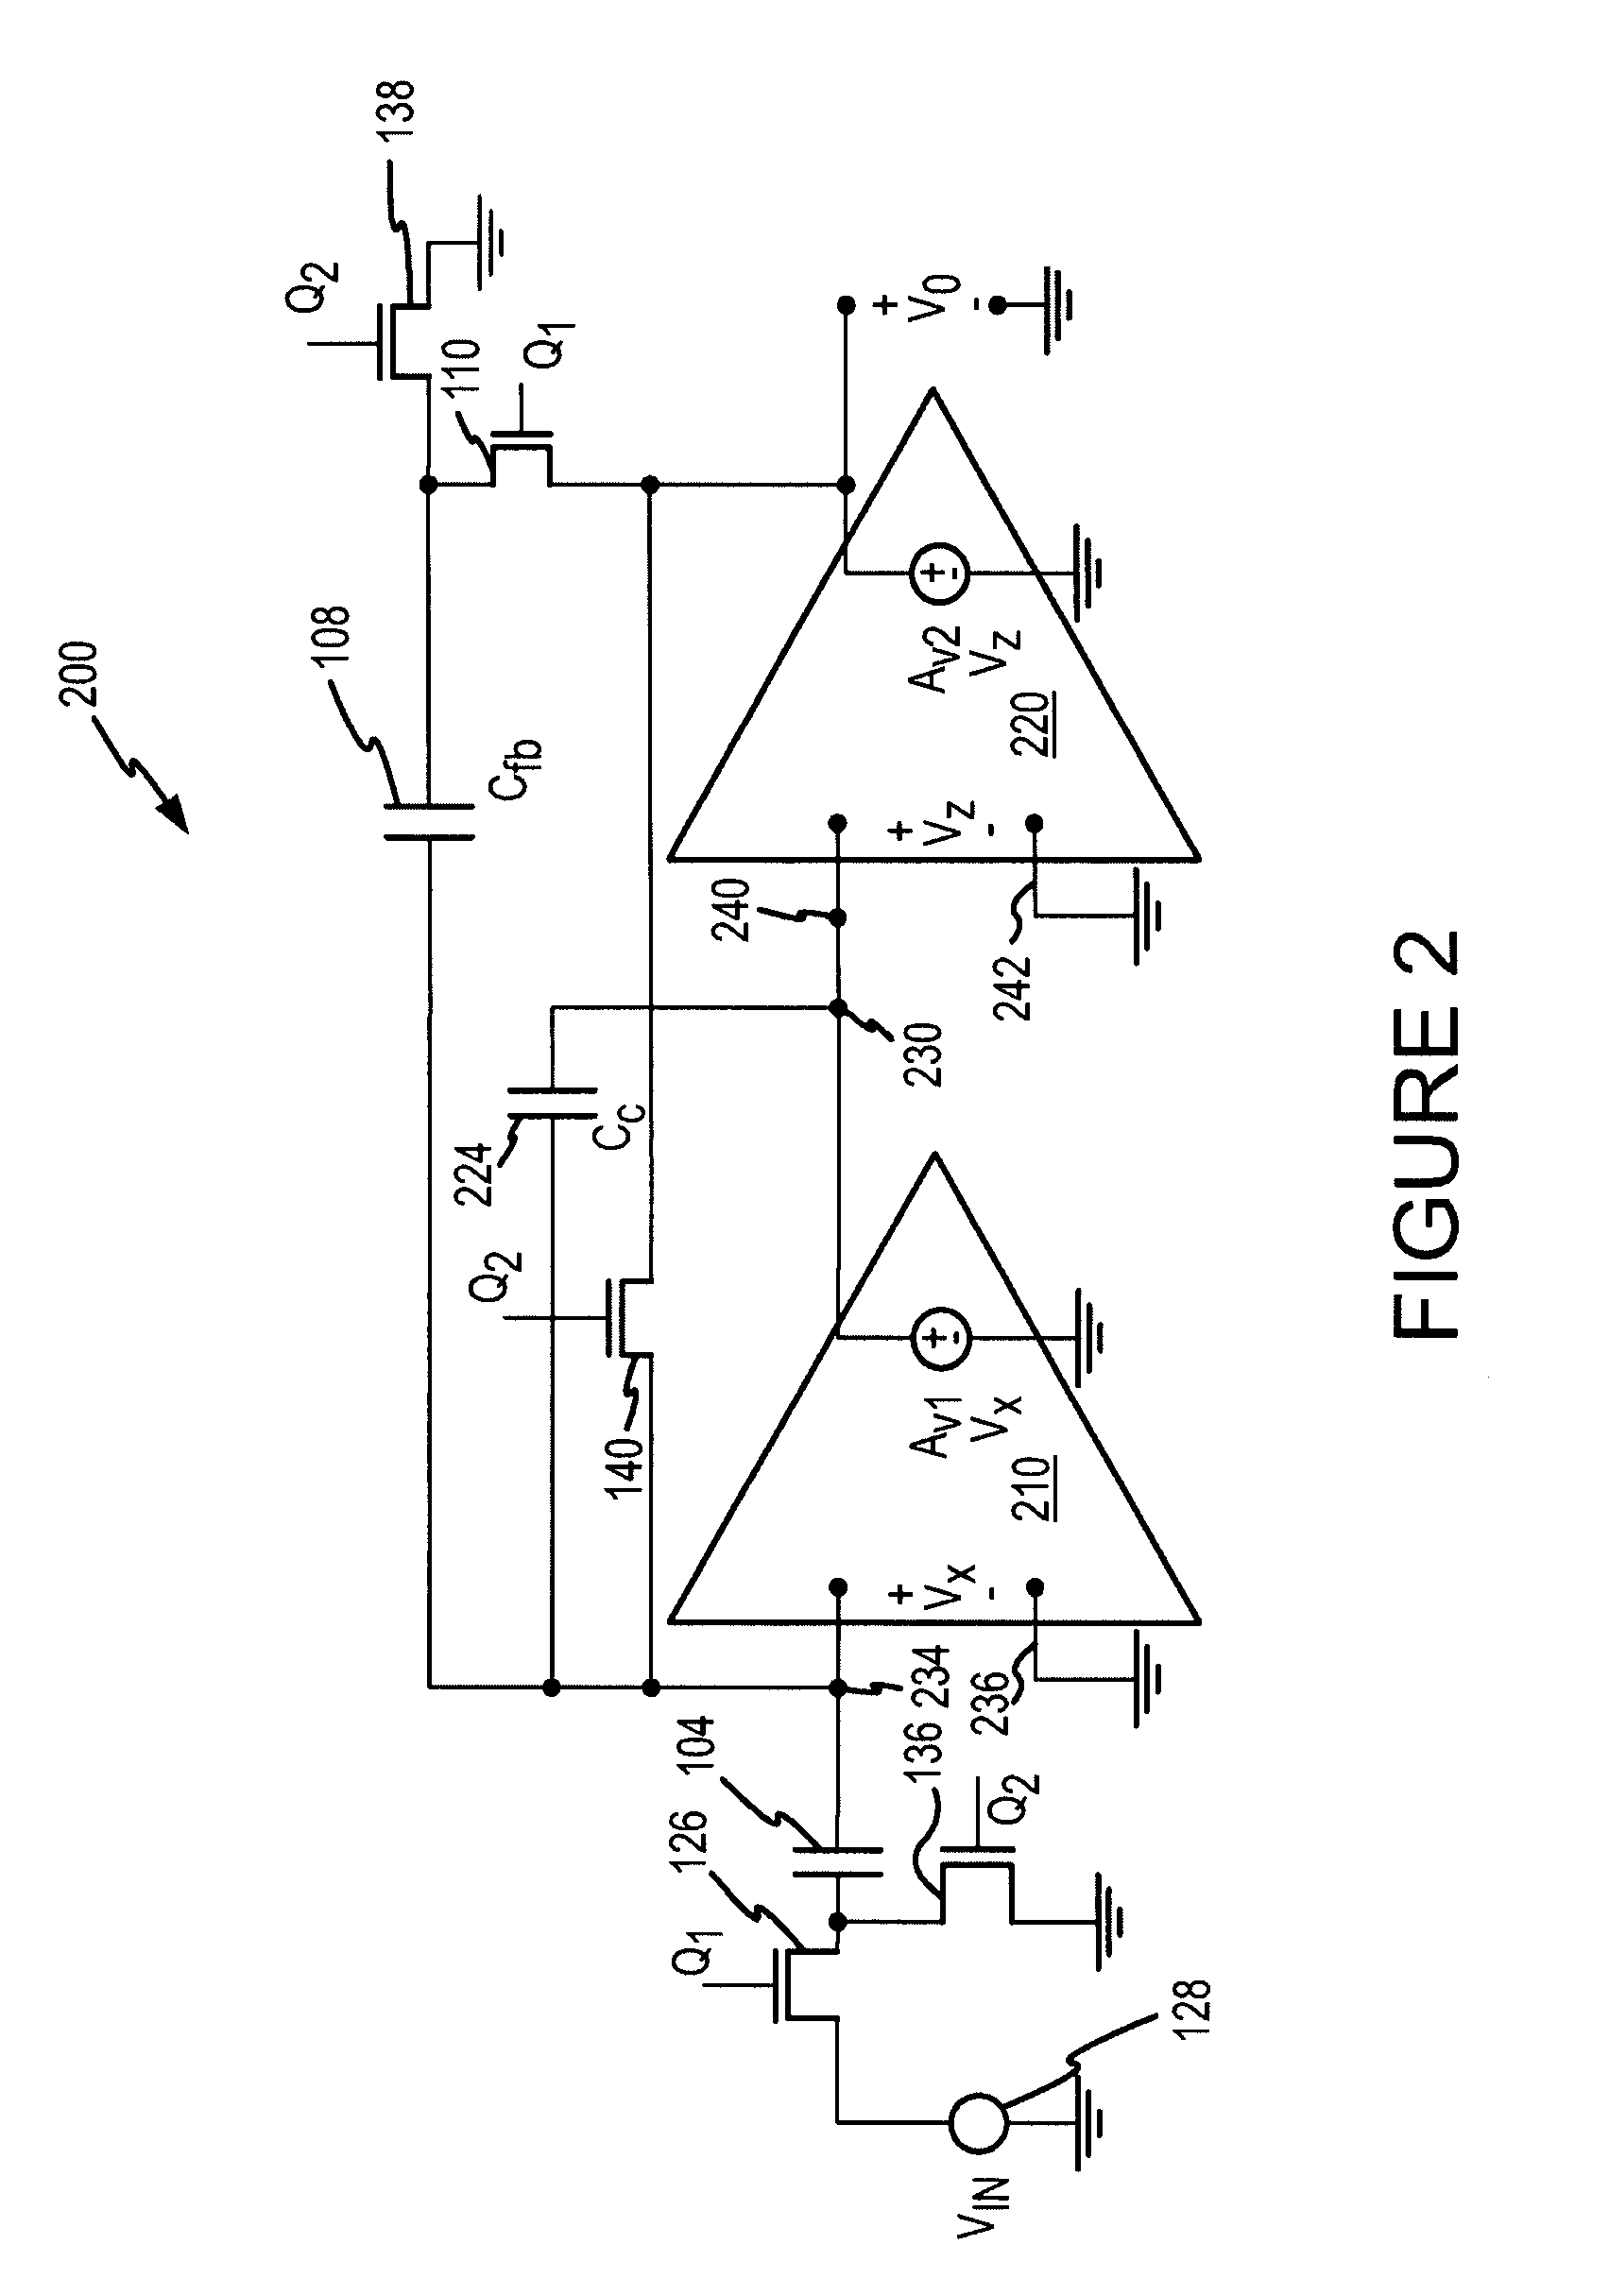 Switched capacitor amplifier with higher gain and improved closed-loop gain accuracy